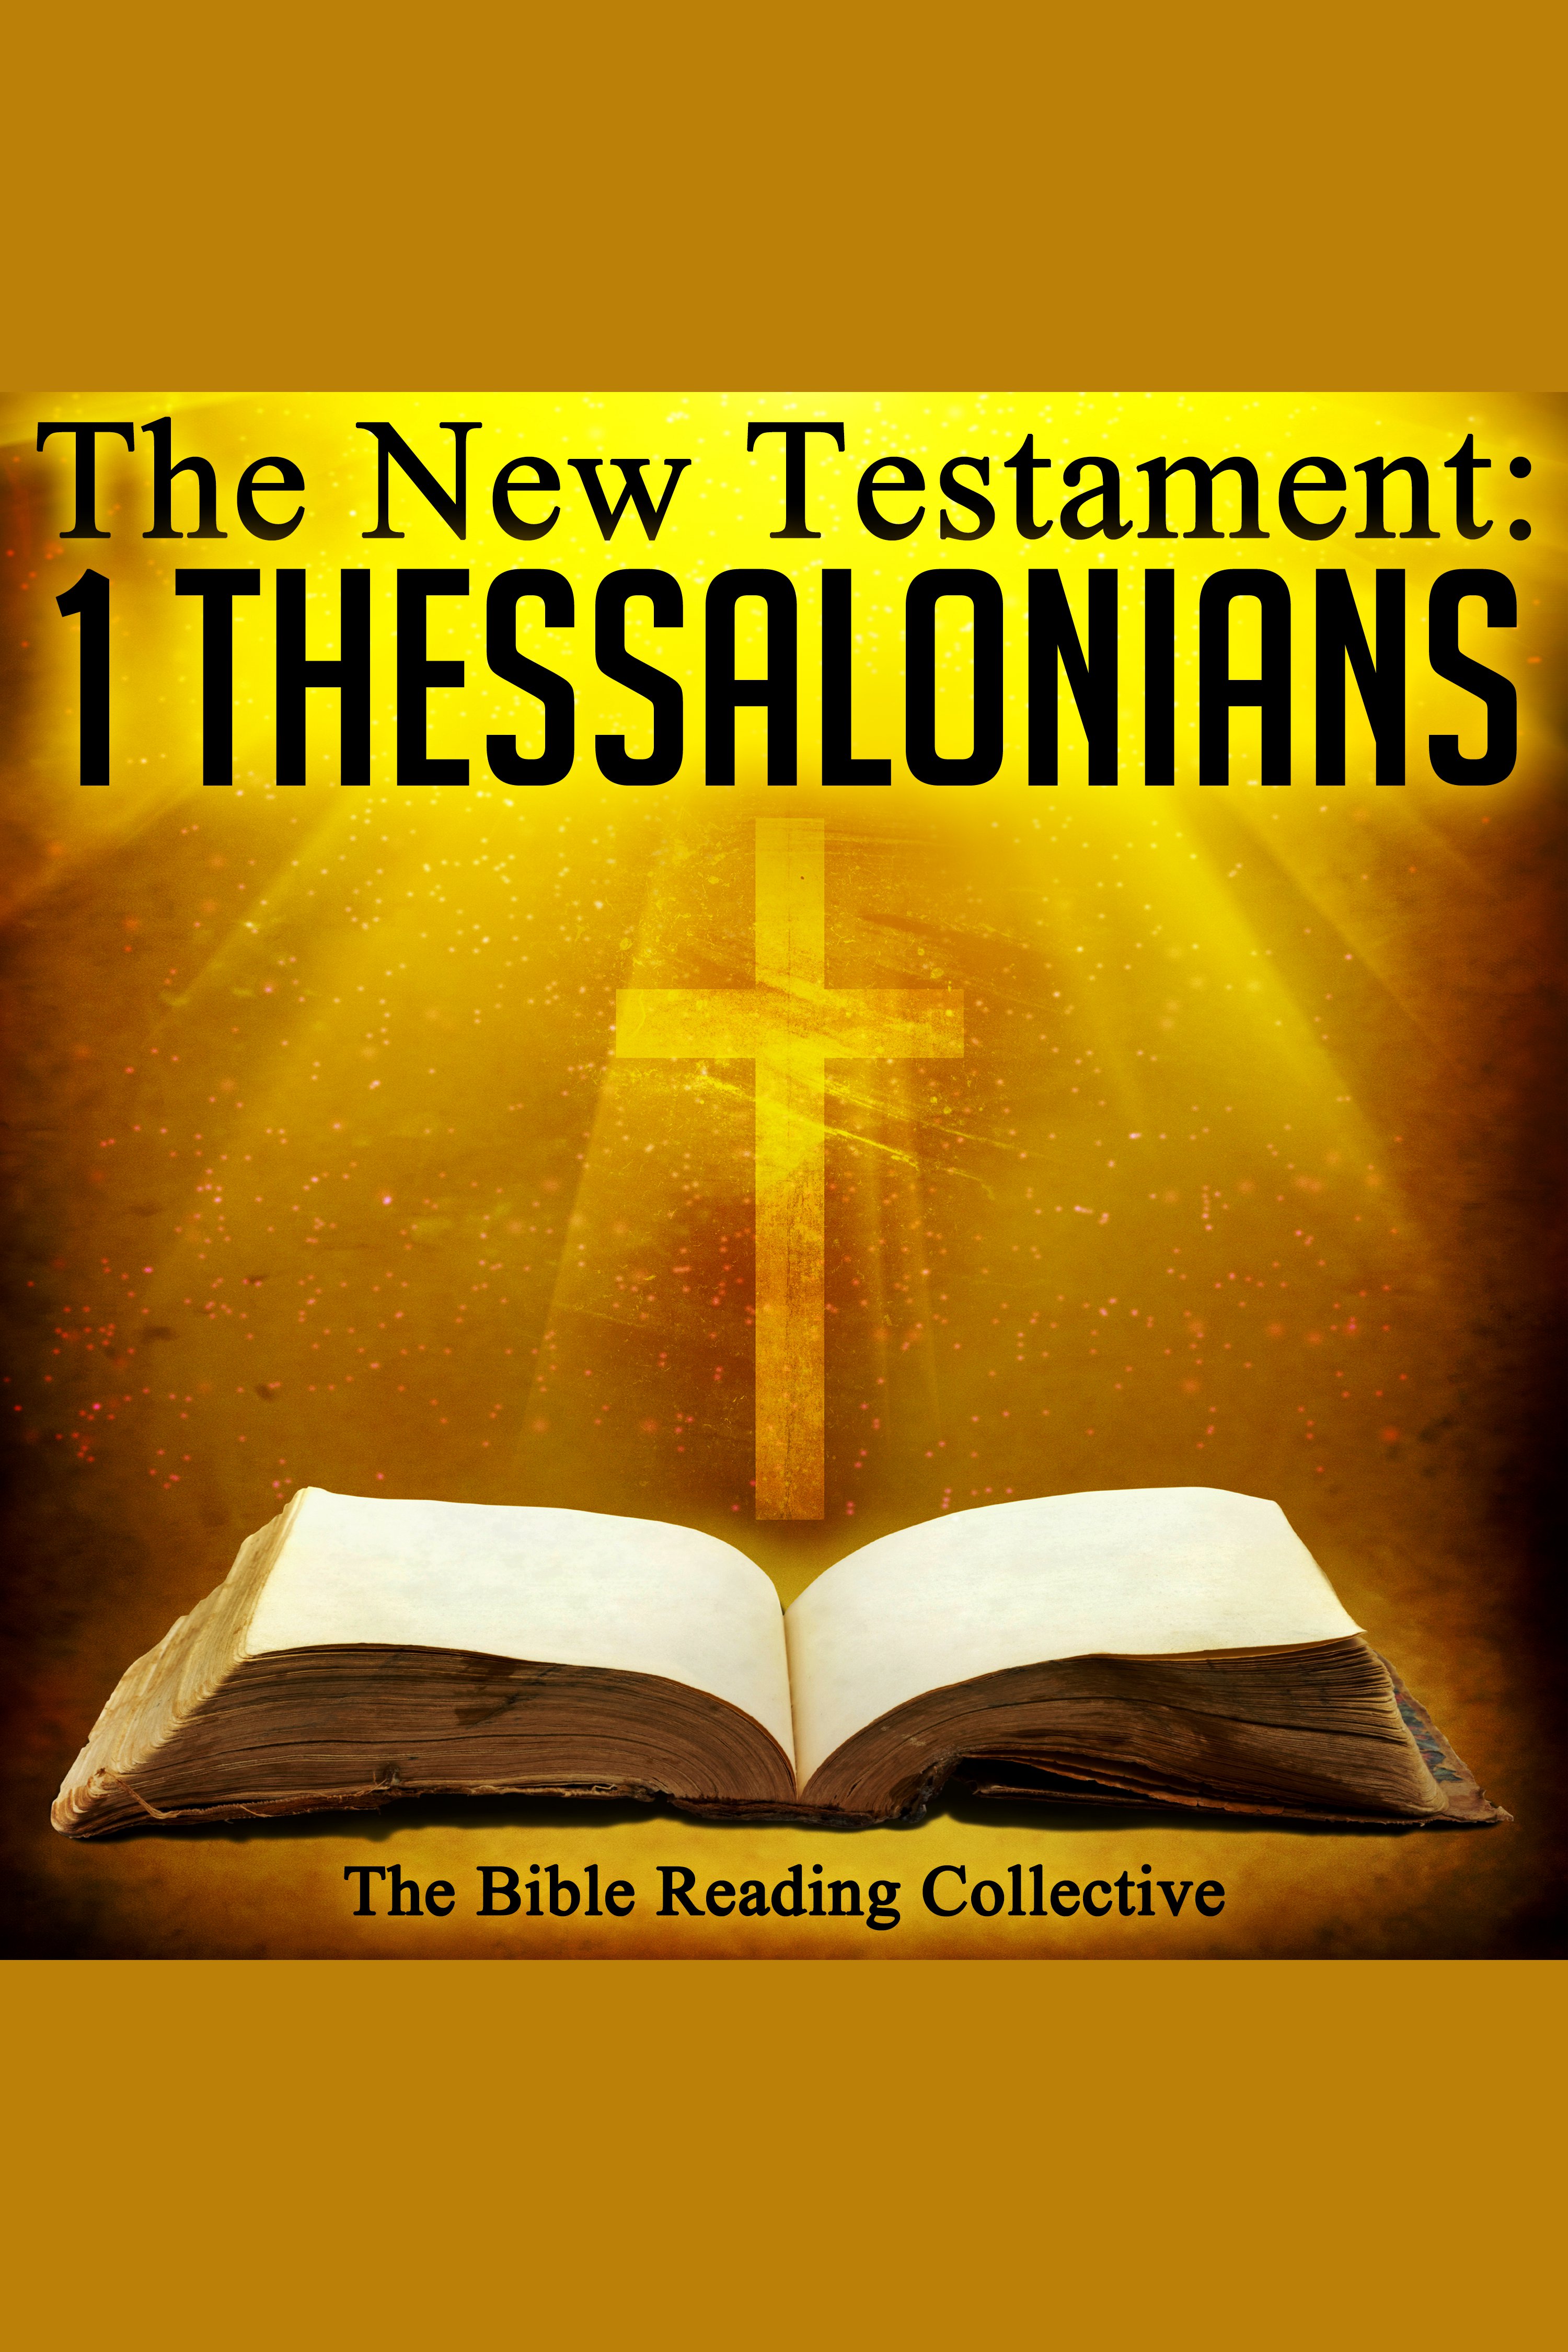 The New Testament: 1 Thessalonians cover image